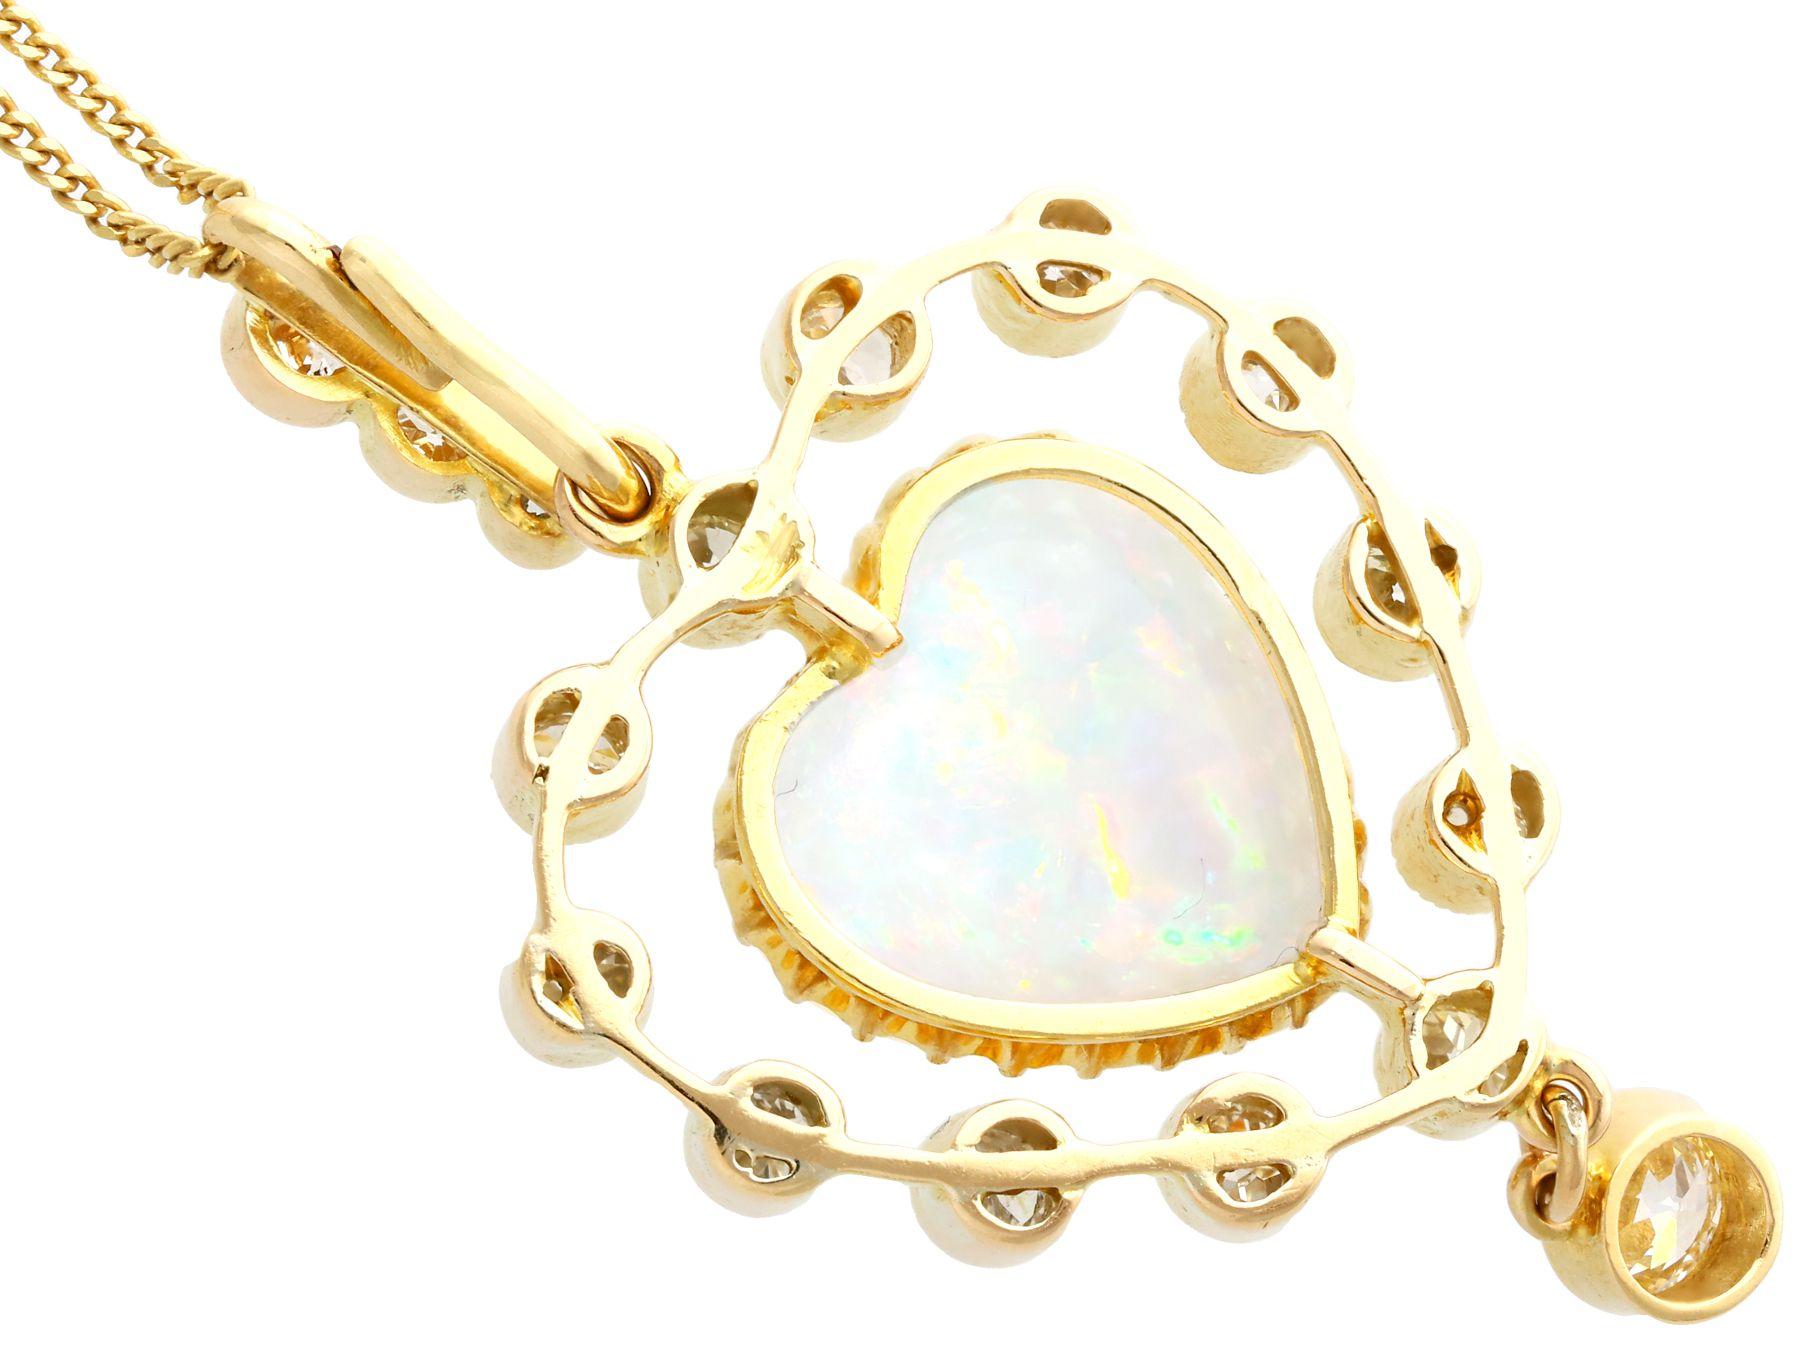 Antique 5.48 Carat Opal and 2.91 Carat Diamond 15k Yellow Gold Heart Pendant In Excellent Condition For Sale In Jesmond, Newcastle Upon Tyne